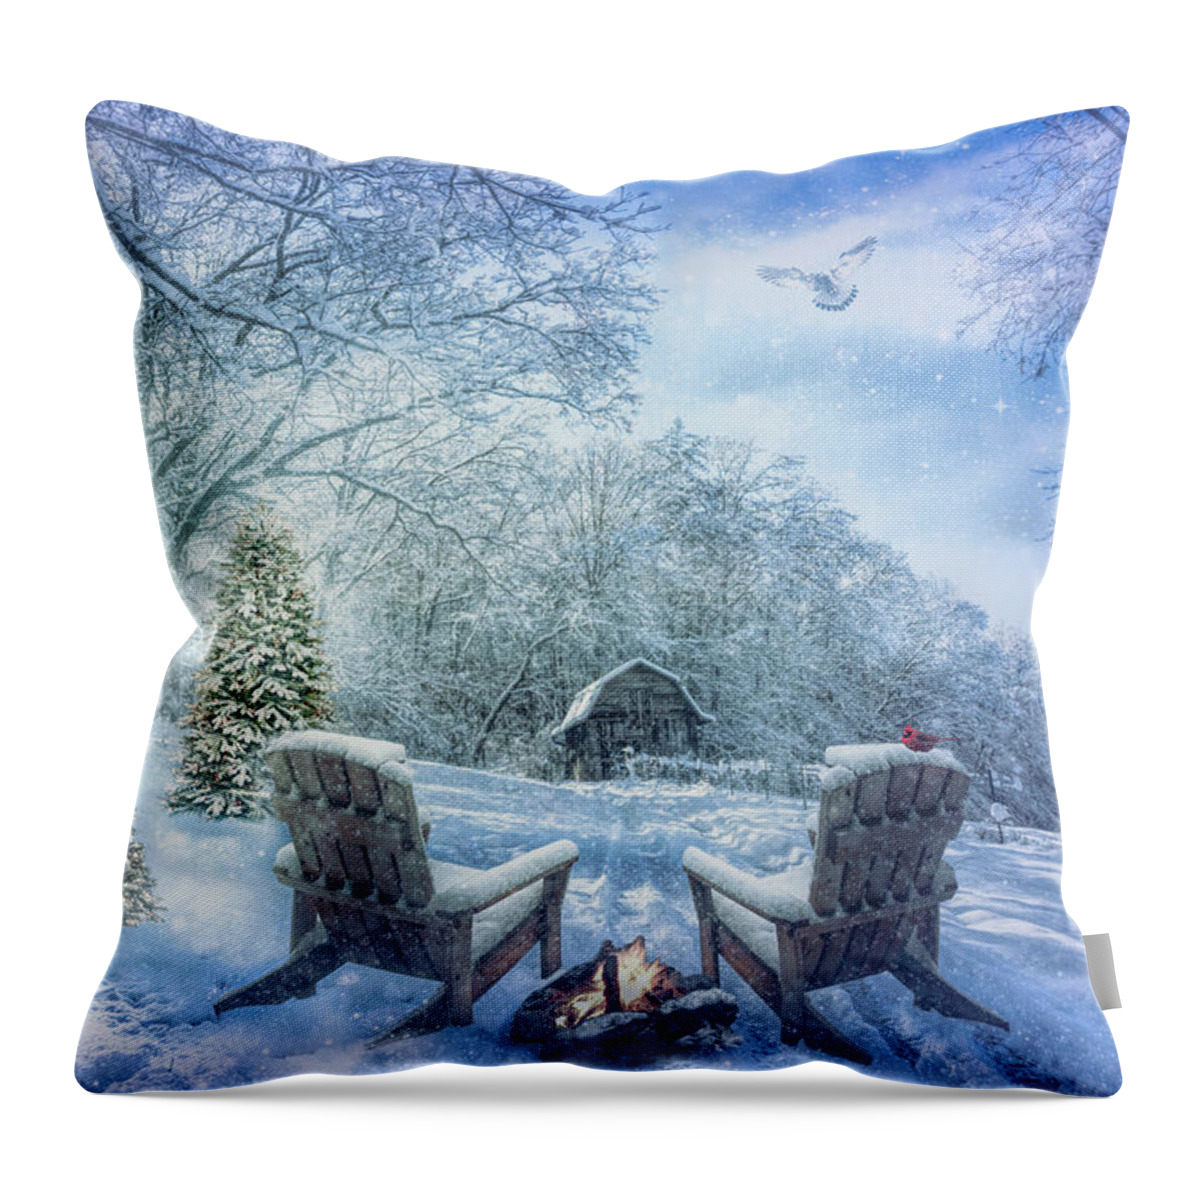 Barns Throw Pillow featuring the photograph Swirling Christmas Country Snow by Debra and Dave Vanderlaan